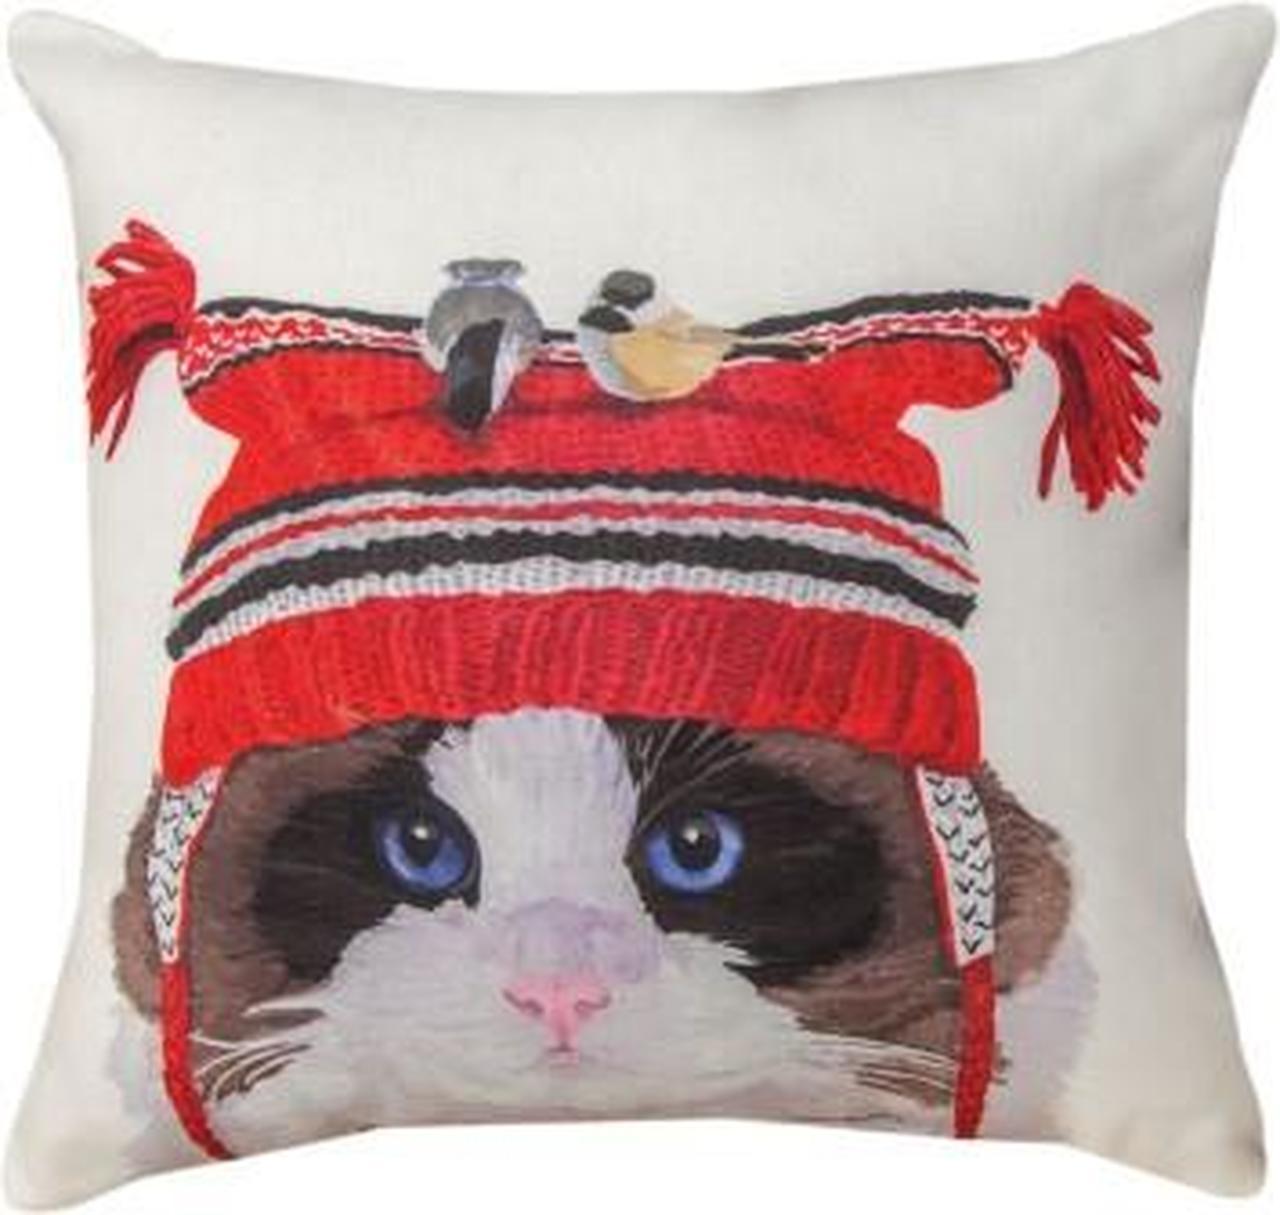 Cat with Birds in Hat Pillow